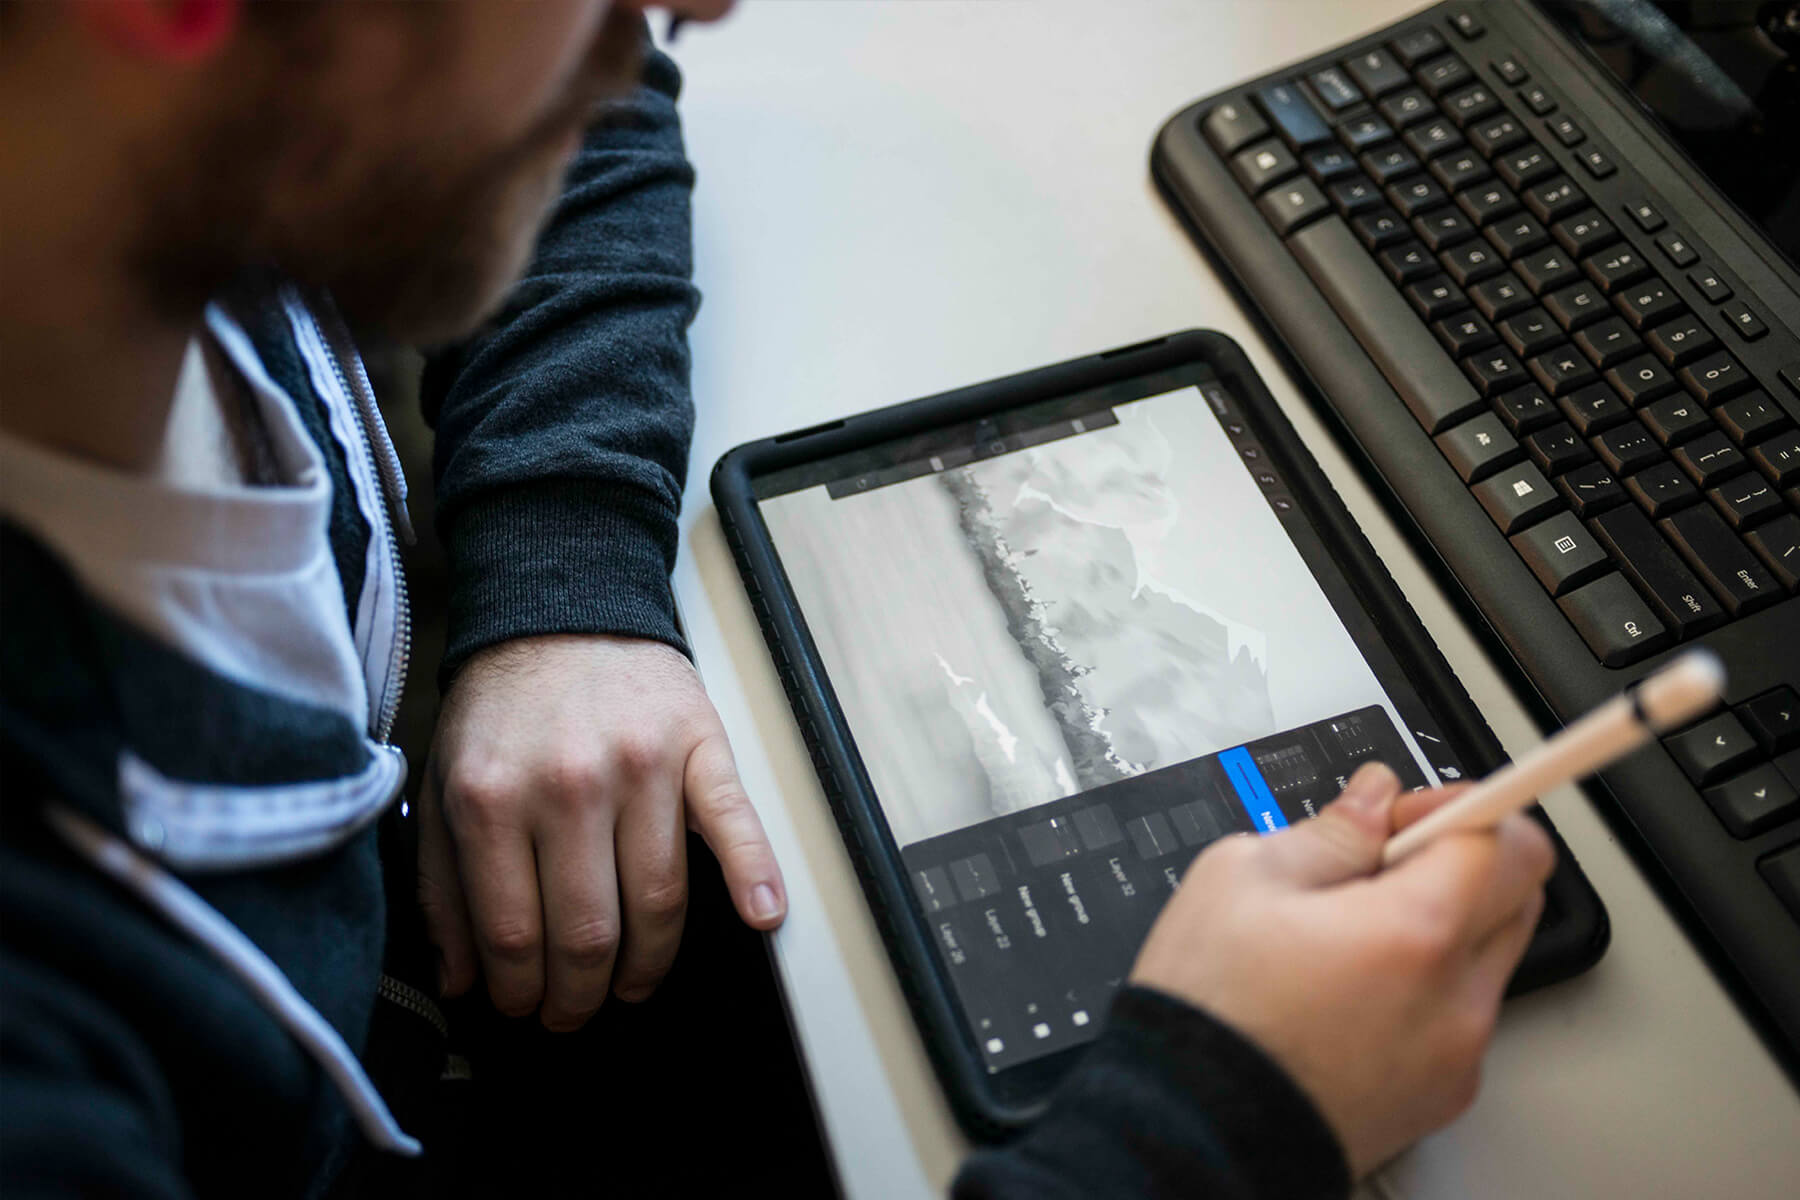 A DigiPen student works on a digital drawing tablet.